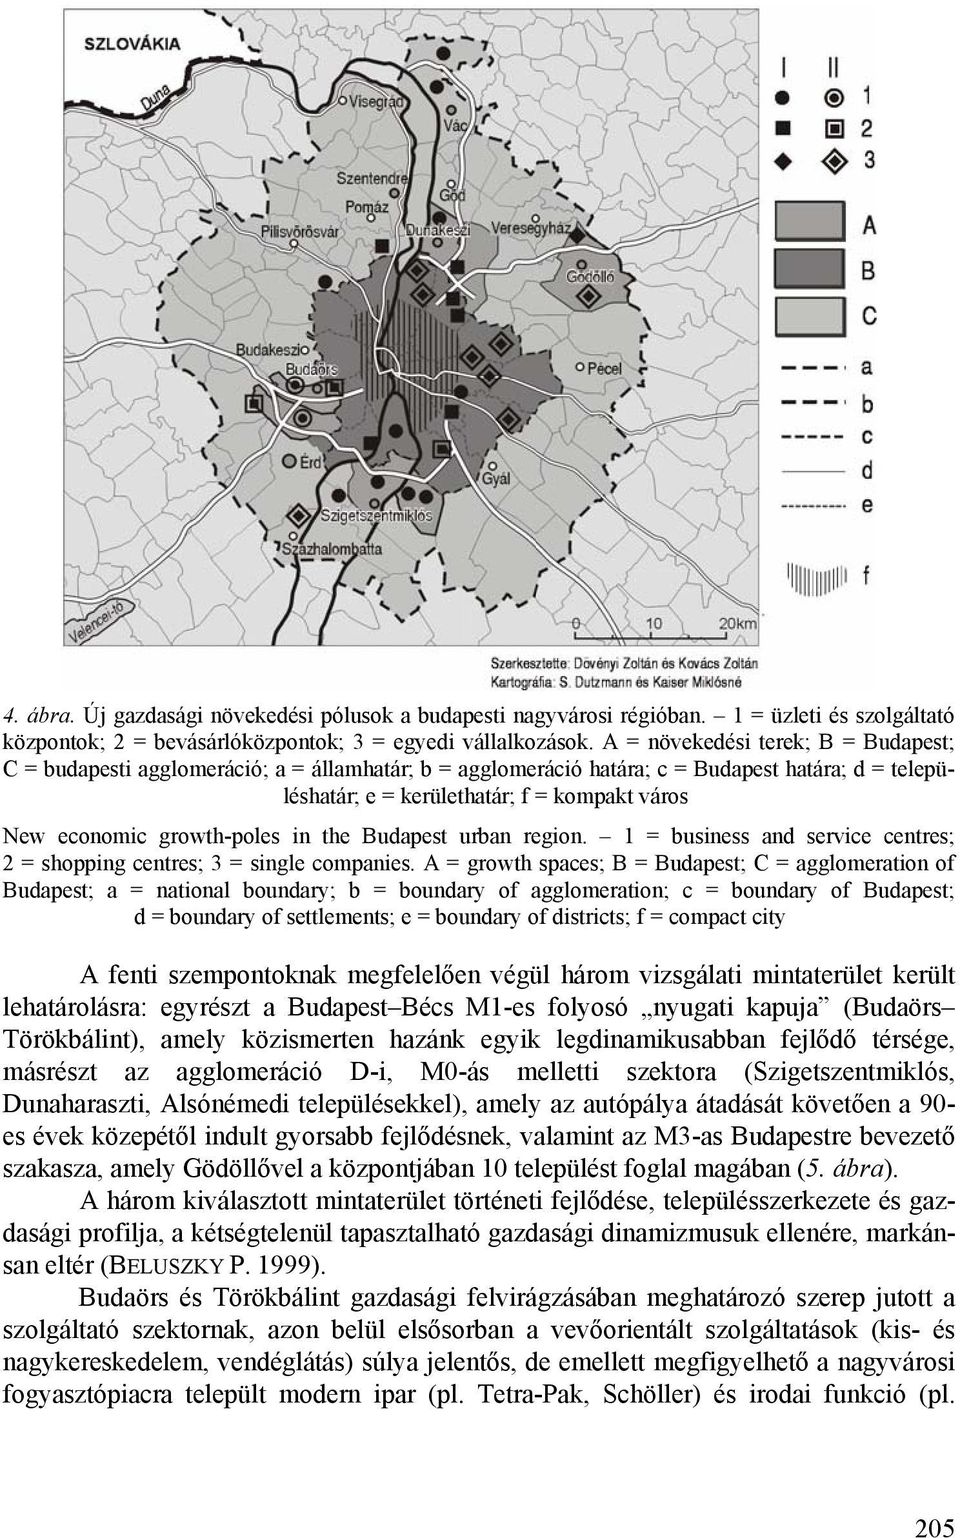 growth-poles in the Budapest urban region. 1 = business and service centres; 2 = shopping centres; 3 = single companies.